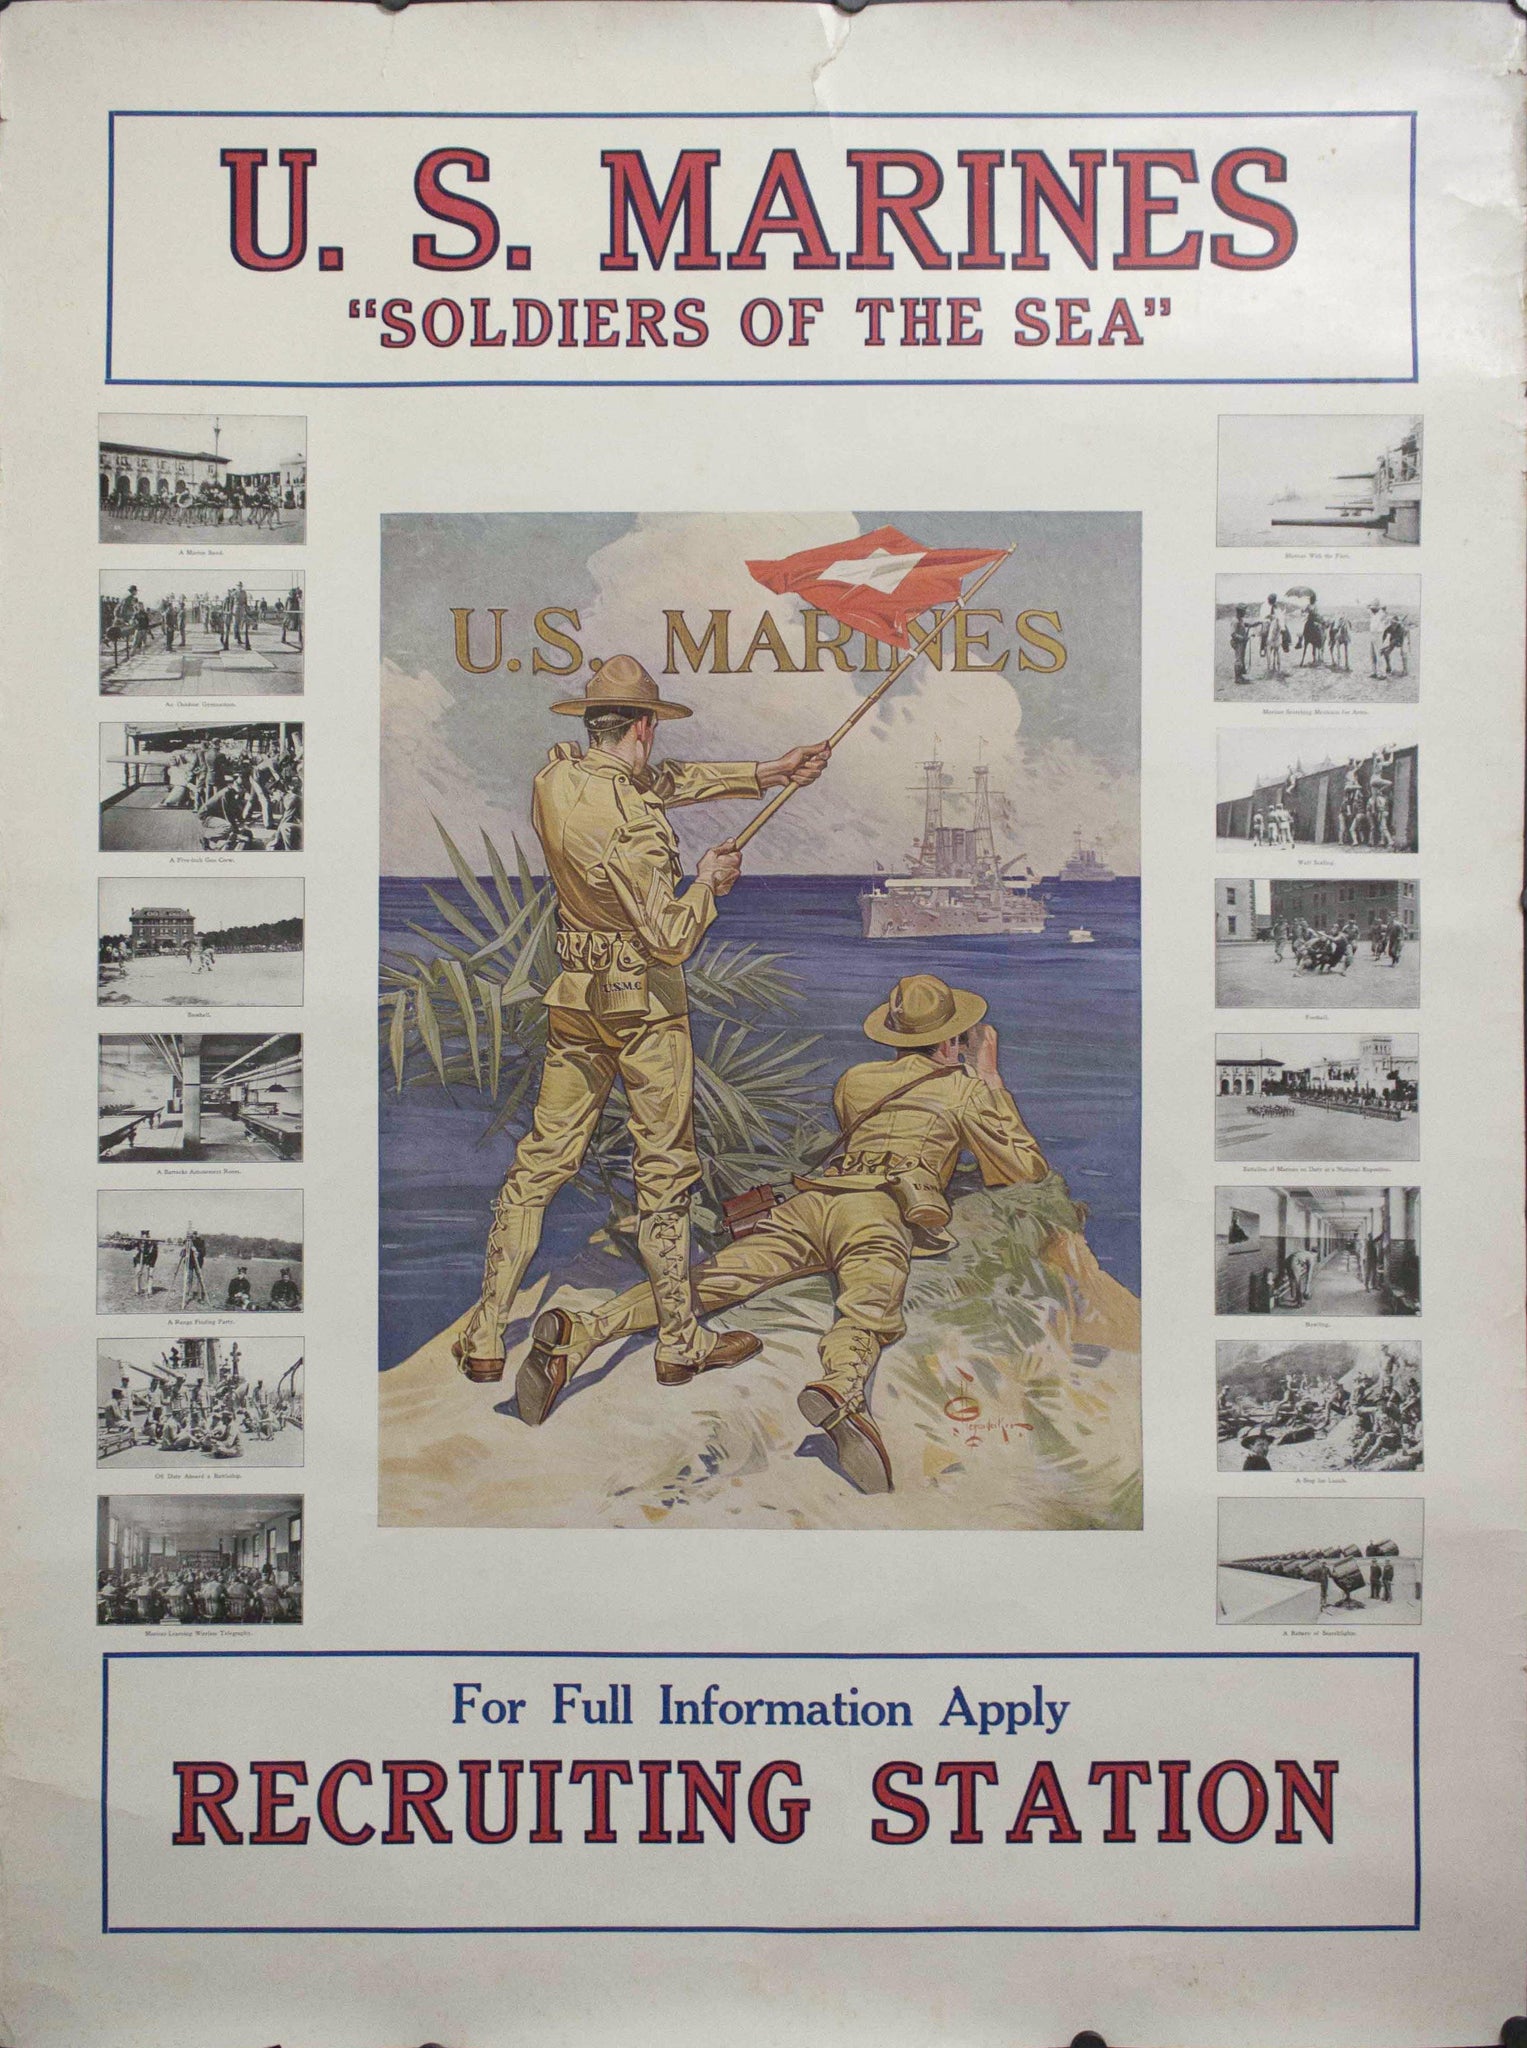 1917 U.S. Marines "Soldiers of the Sea" | For Full Information Apply Recruiting Station - Golden Age Posters